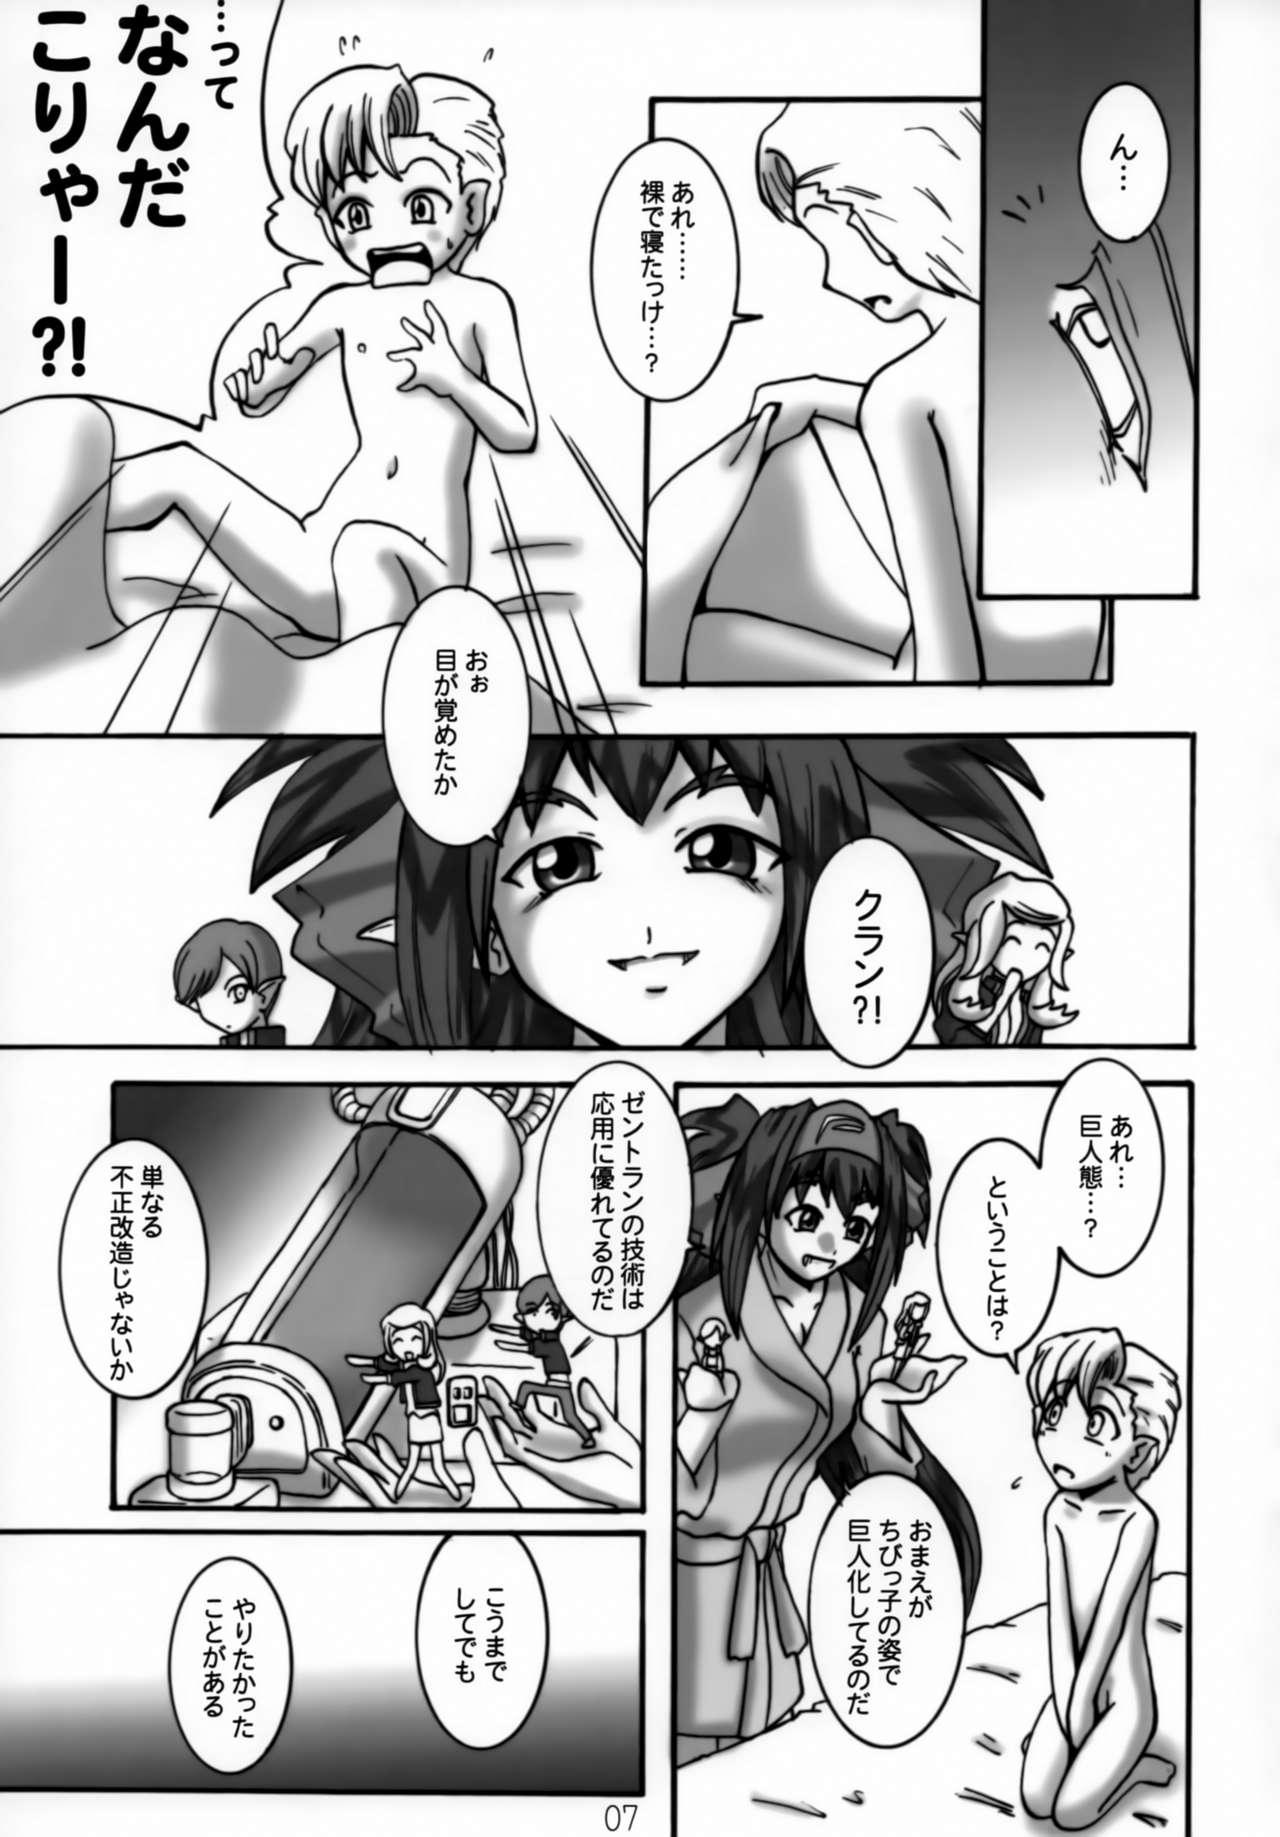 White Girl Zentra Play - Macross frontier Class - Page 6